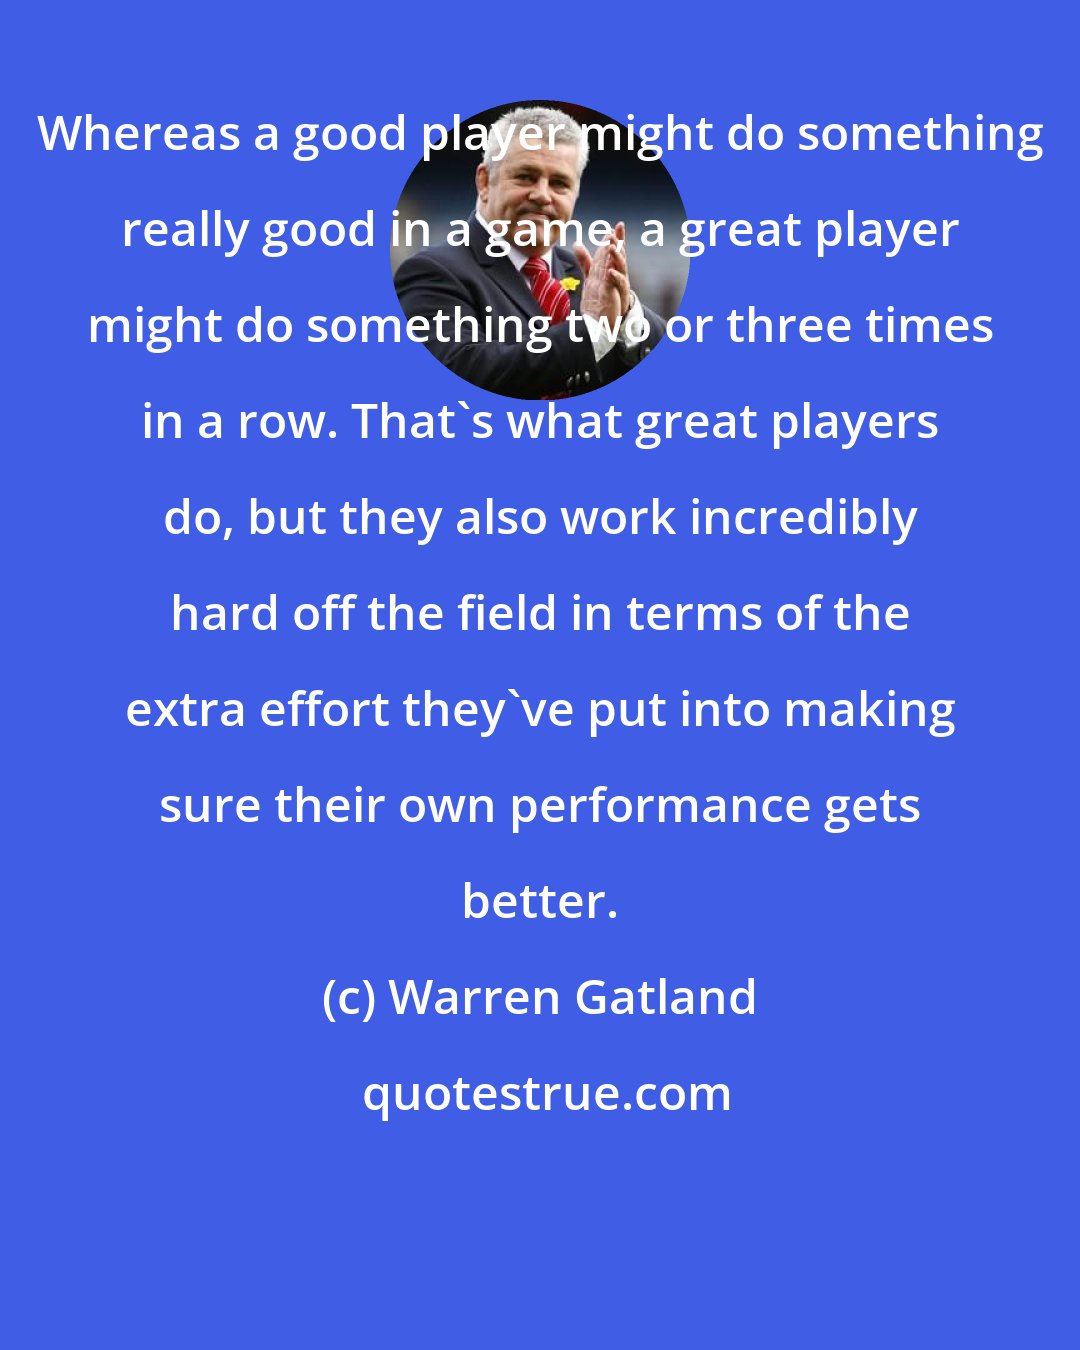 Warren Gatland: Whereas a good player might do something really good in a game, a great player might do something two or three times in a row. That's what great players do, but they also work incredibly hard off the field in terms of the extra effort they've put into making sure their own performance gets better.